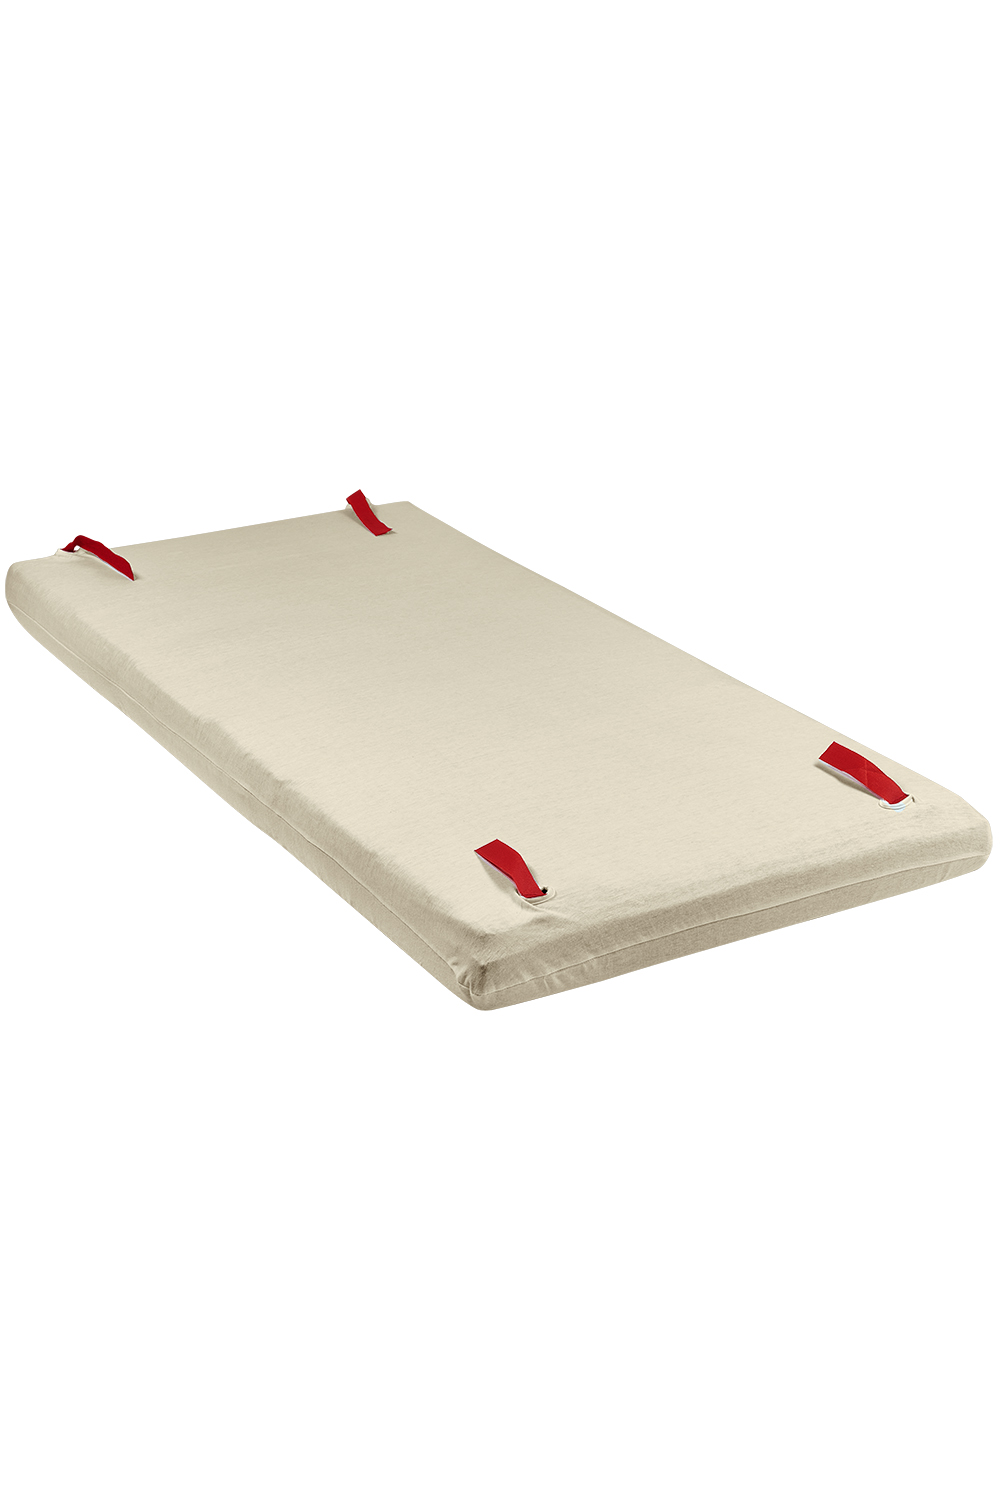 Campingbed matrashoes deluxe Uni - sand - 60x120cm